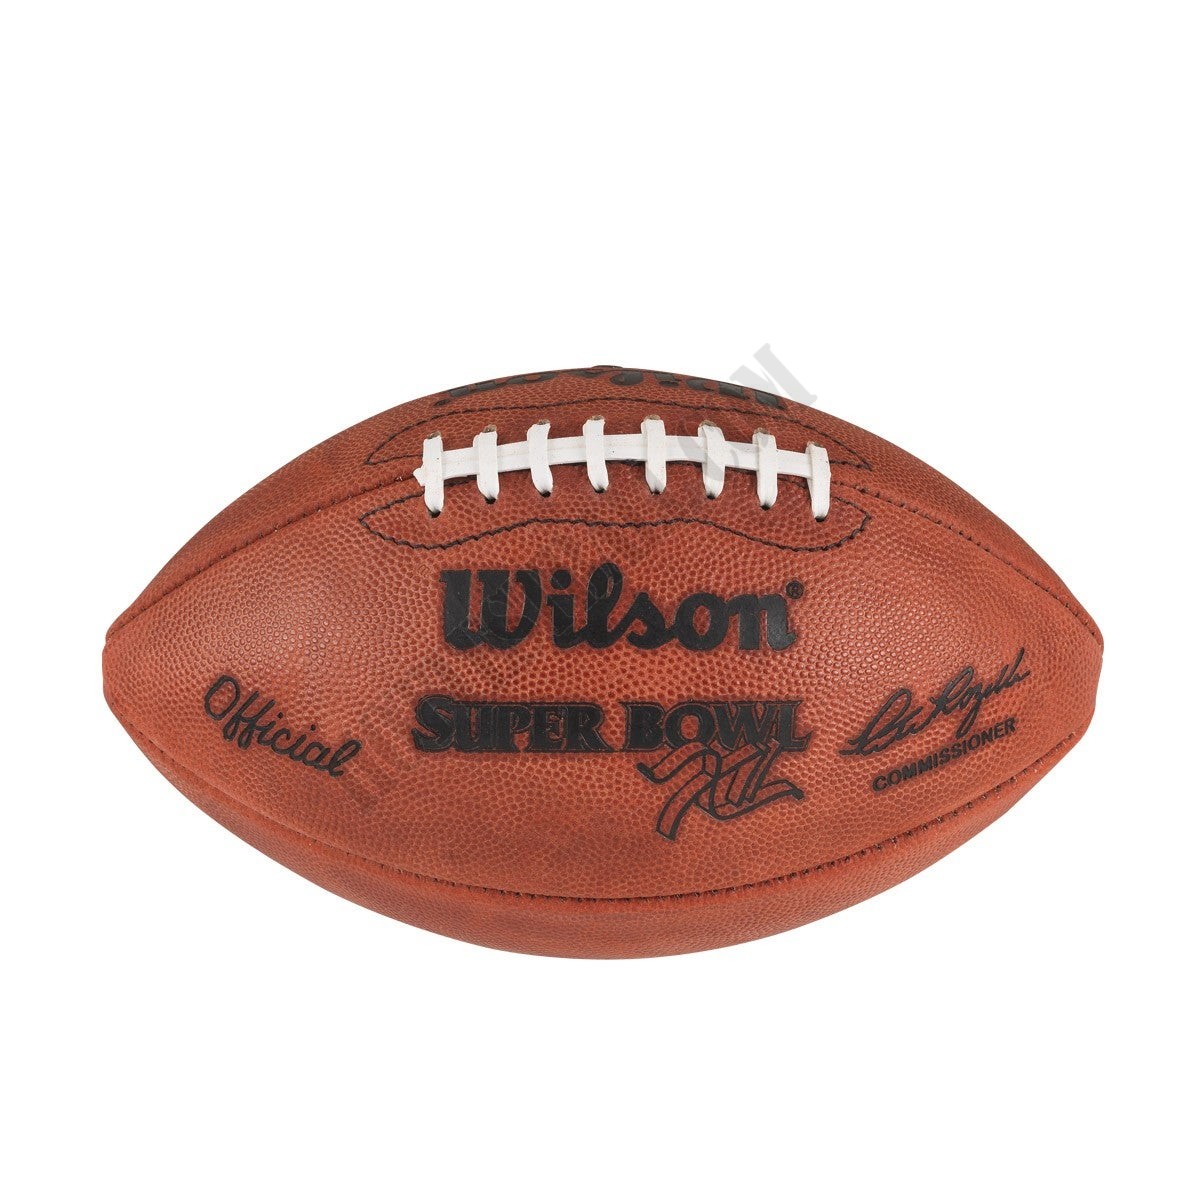 Super Bowl XII Game Football - Dallas Cowboys ● Wilson Promotions - -0